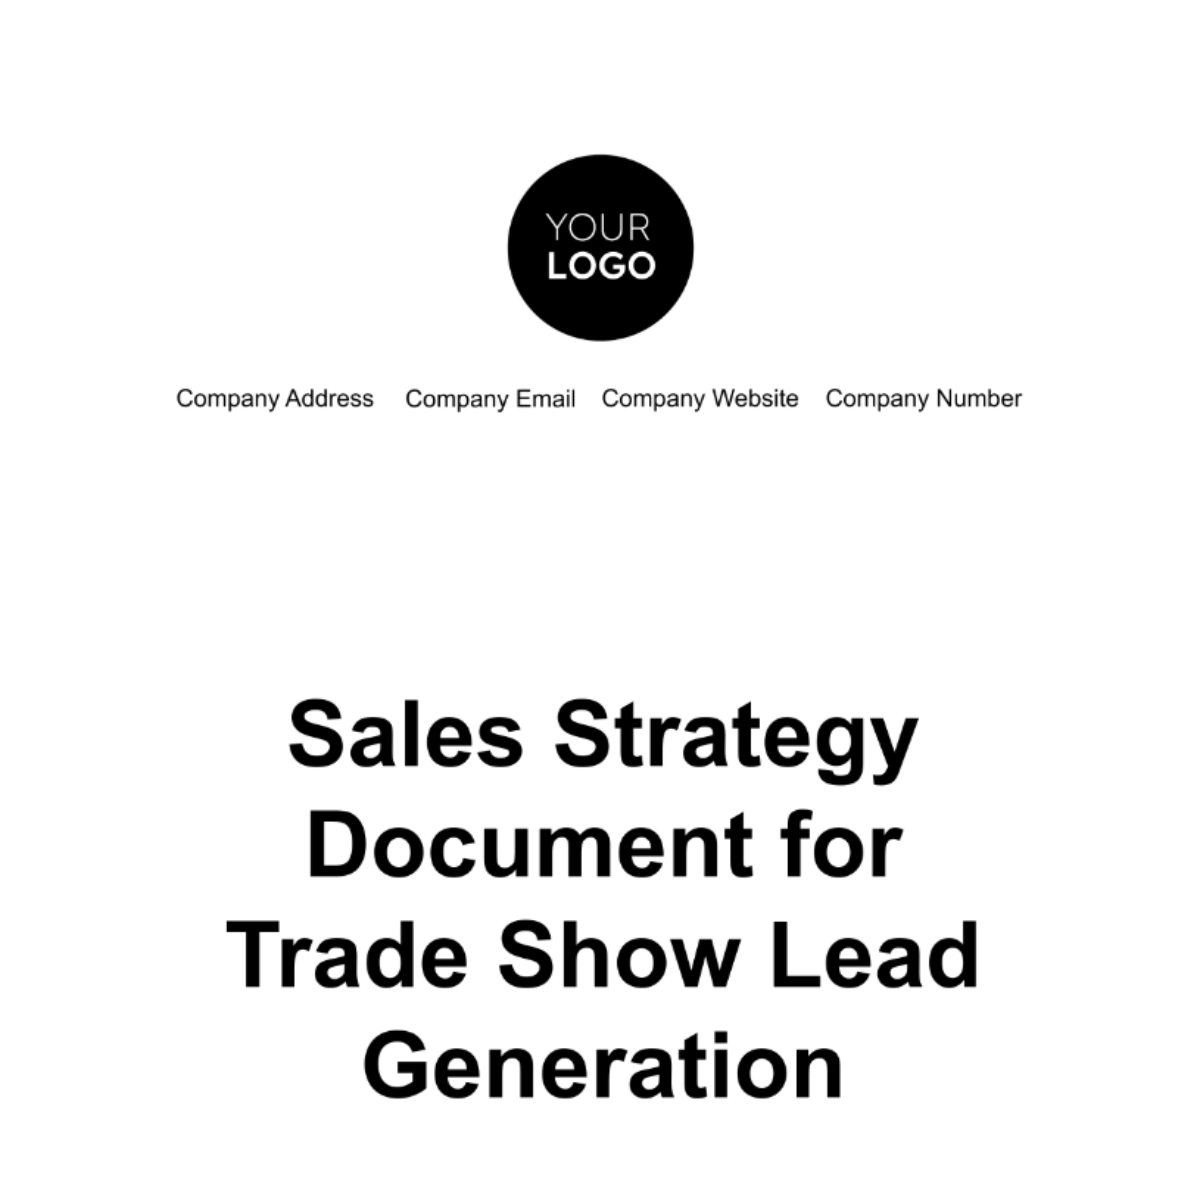 Sales Strategy Document for Trade Show Lead Generation Template